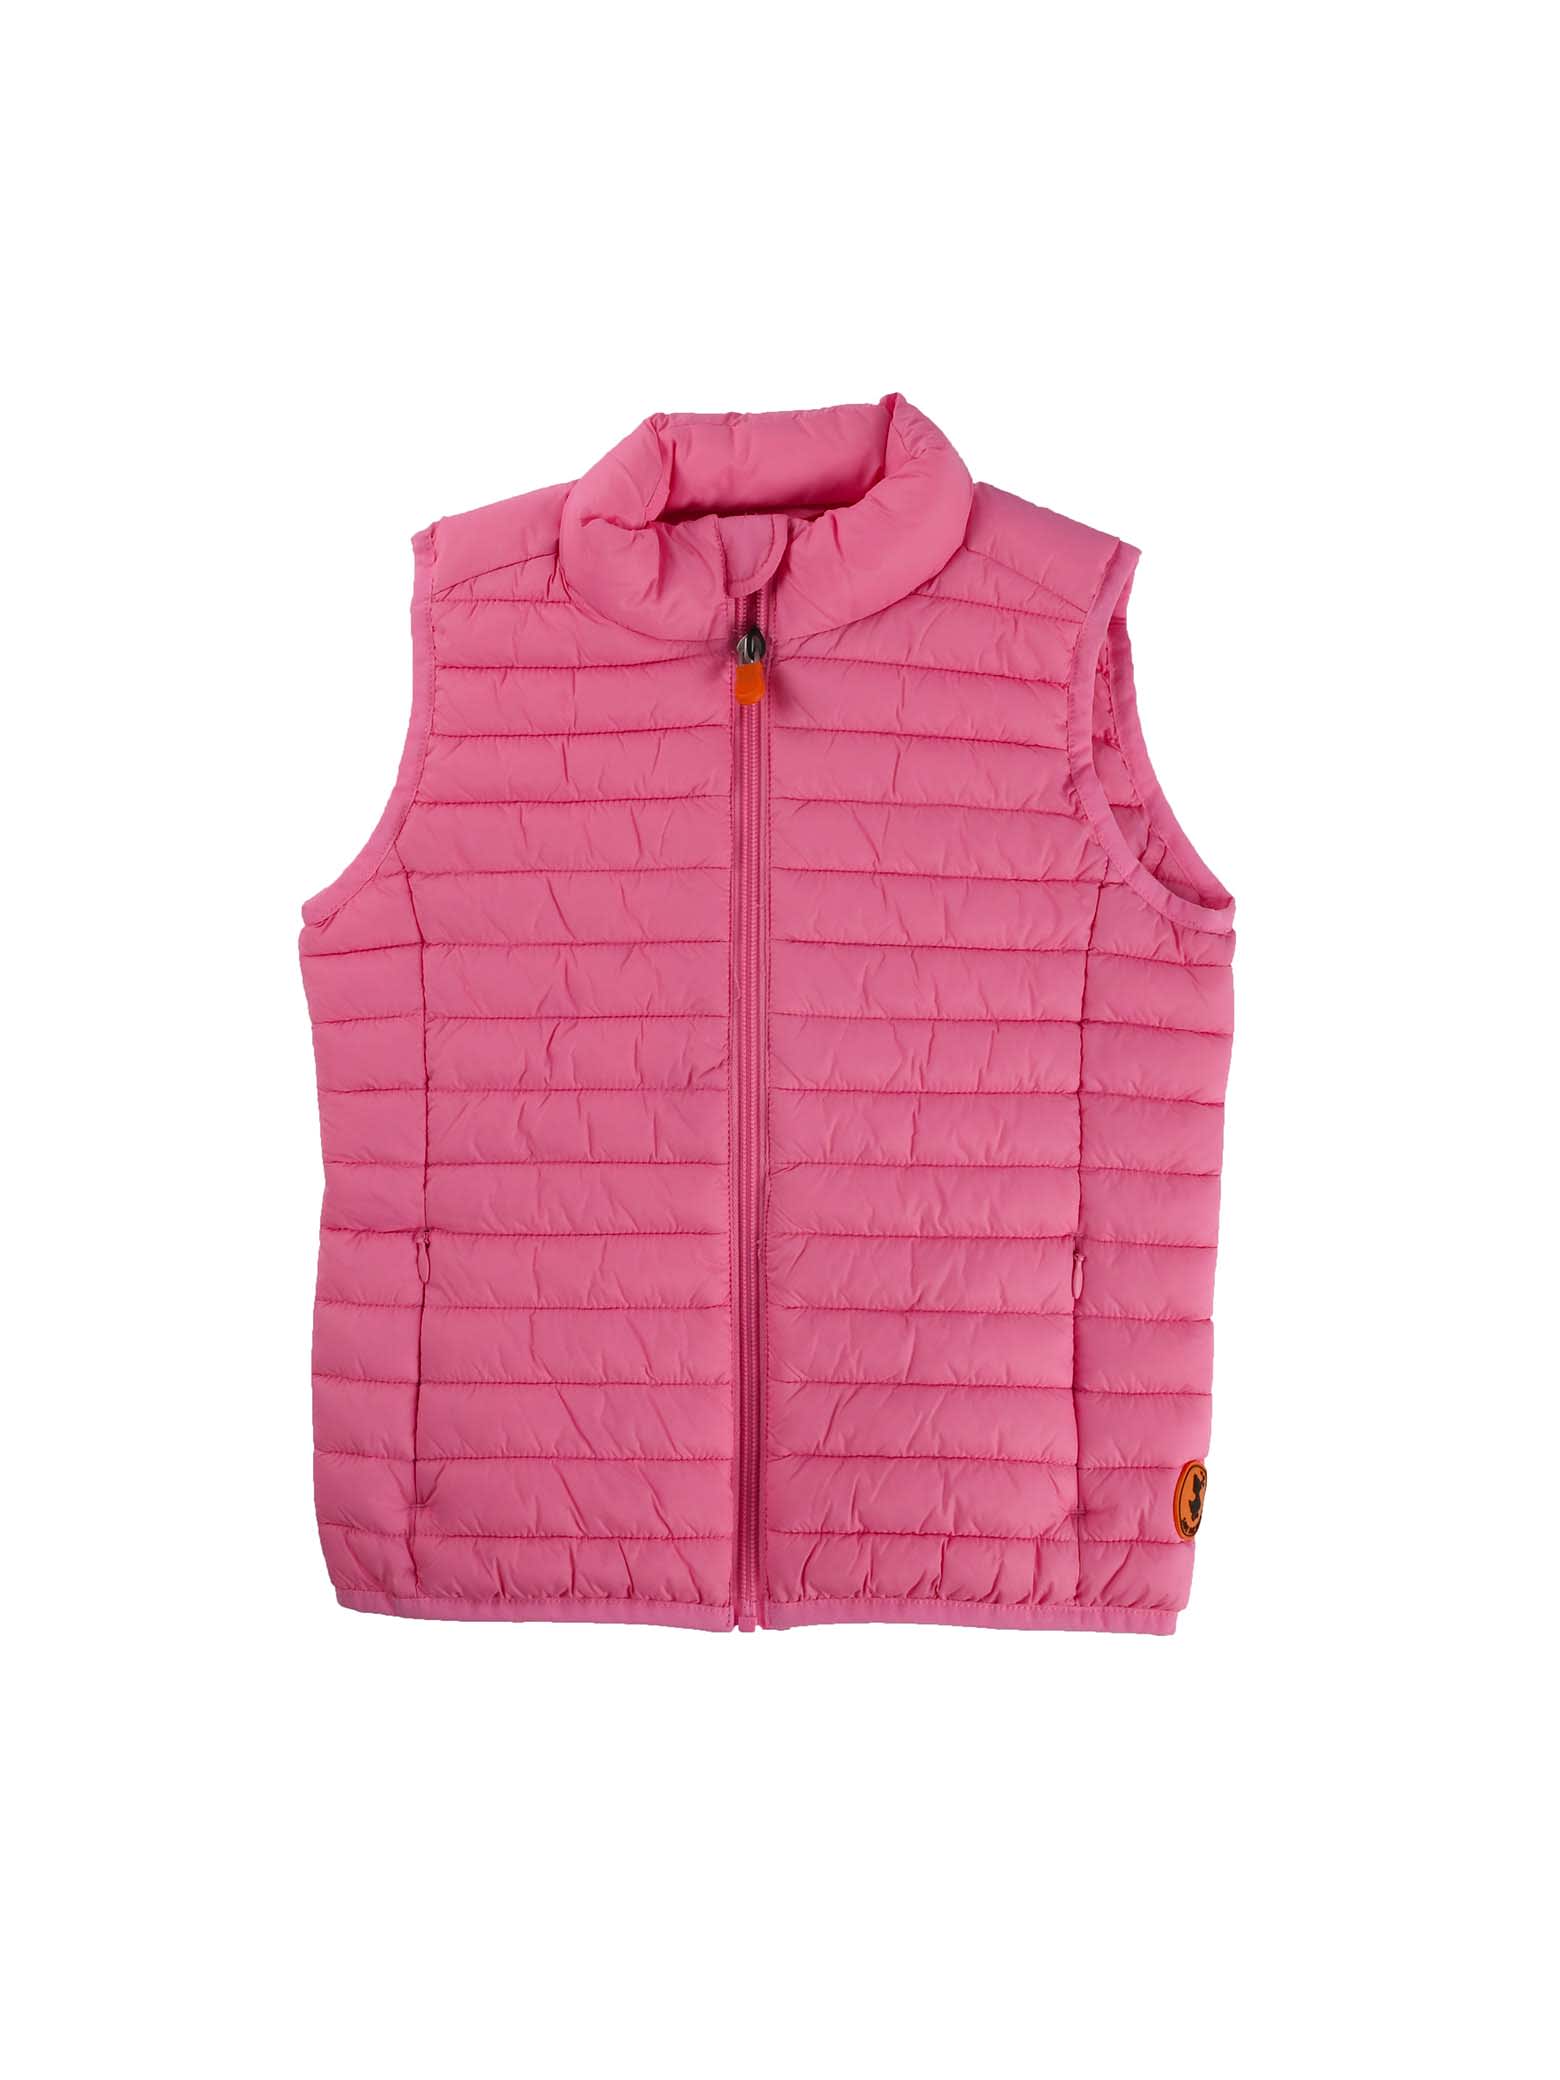 Save the Duck Pink Padded Vest